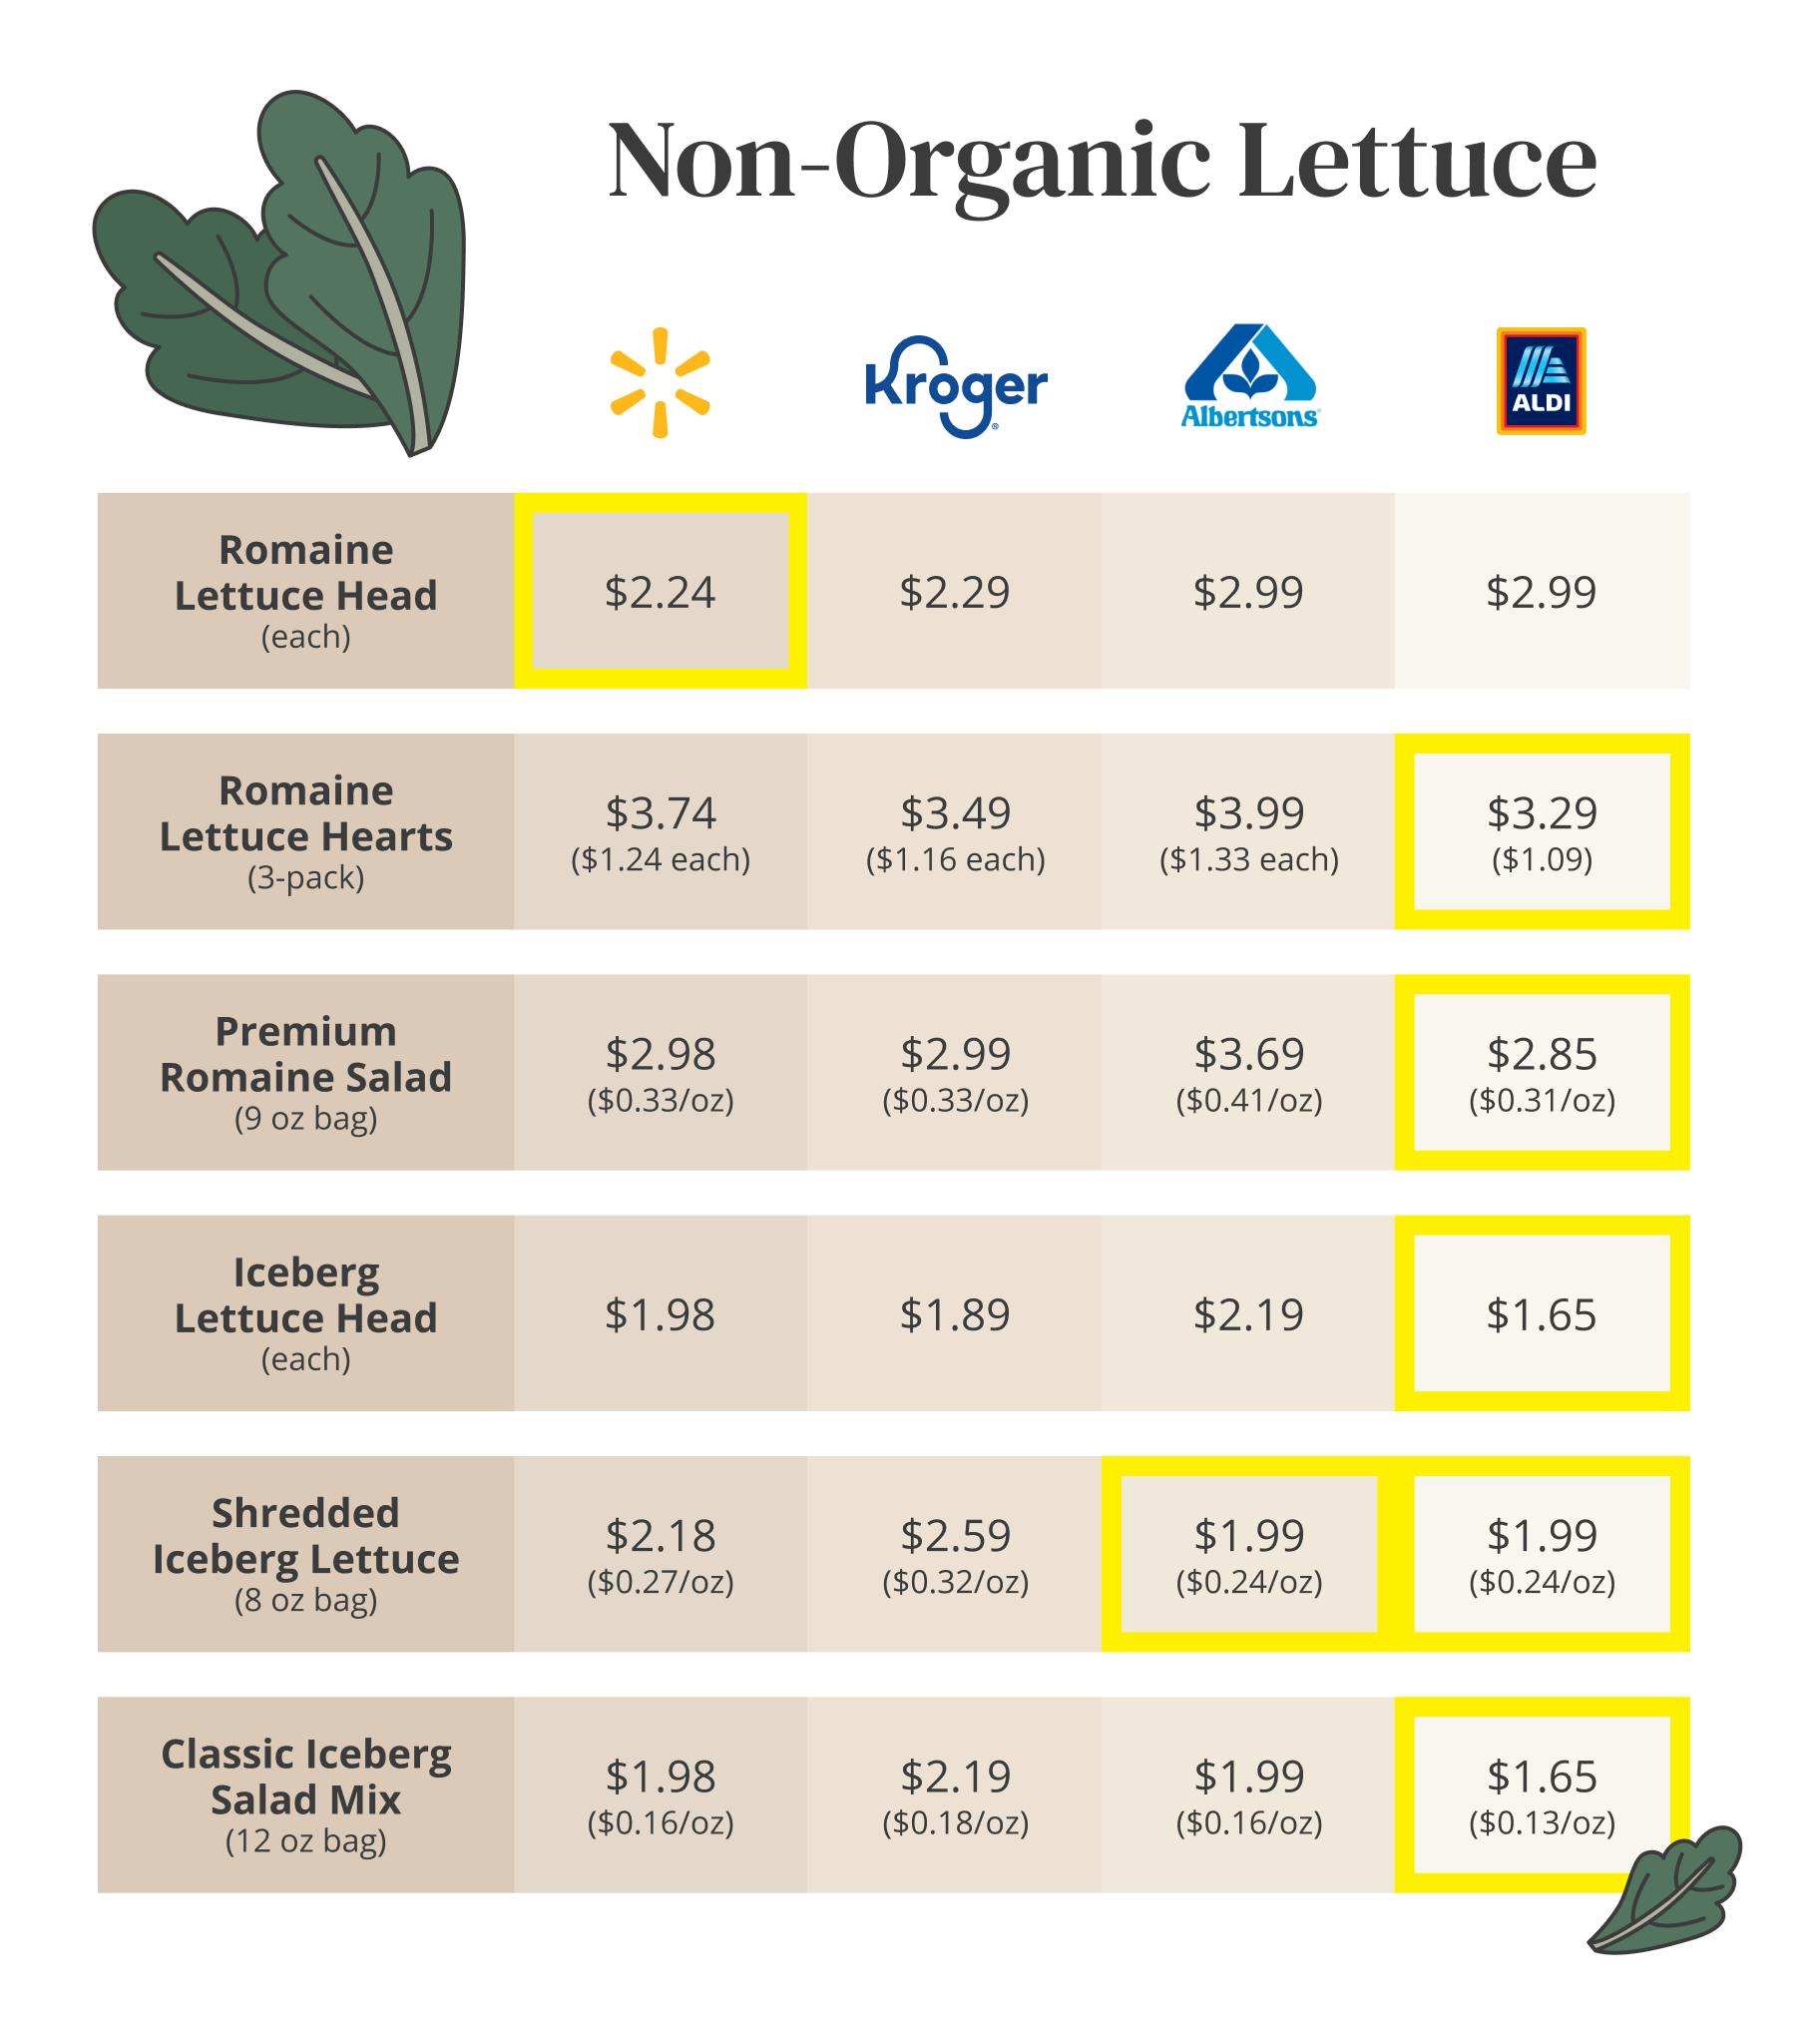 lettuce shortage - A table comparing the prices of non-organic lettuce at stores including Walmart, Kroger, Albertsons, and Aldi